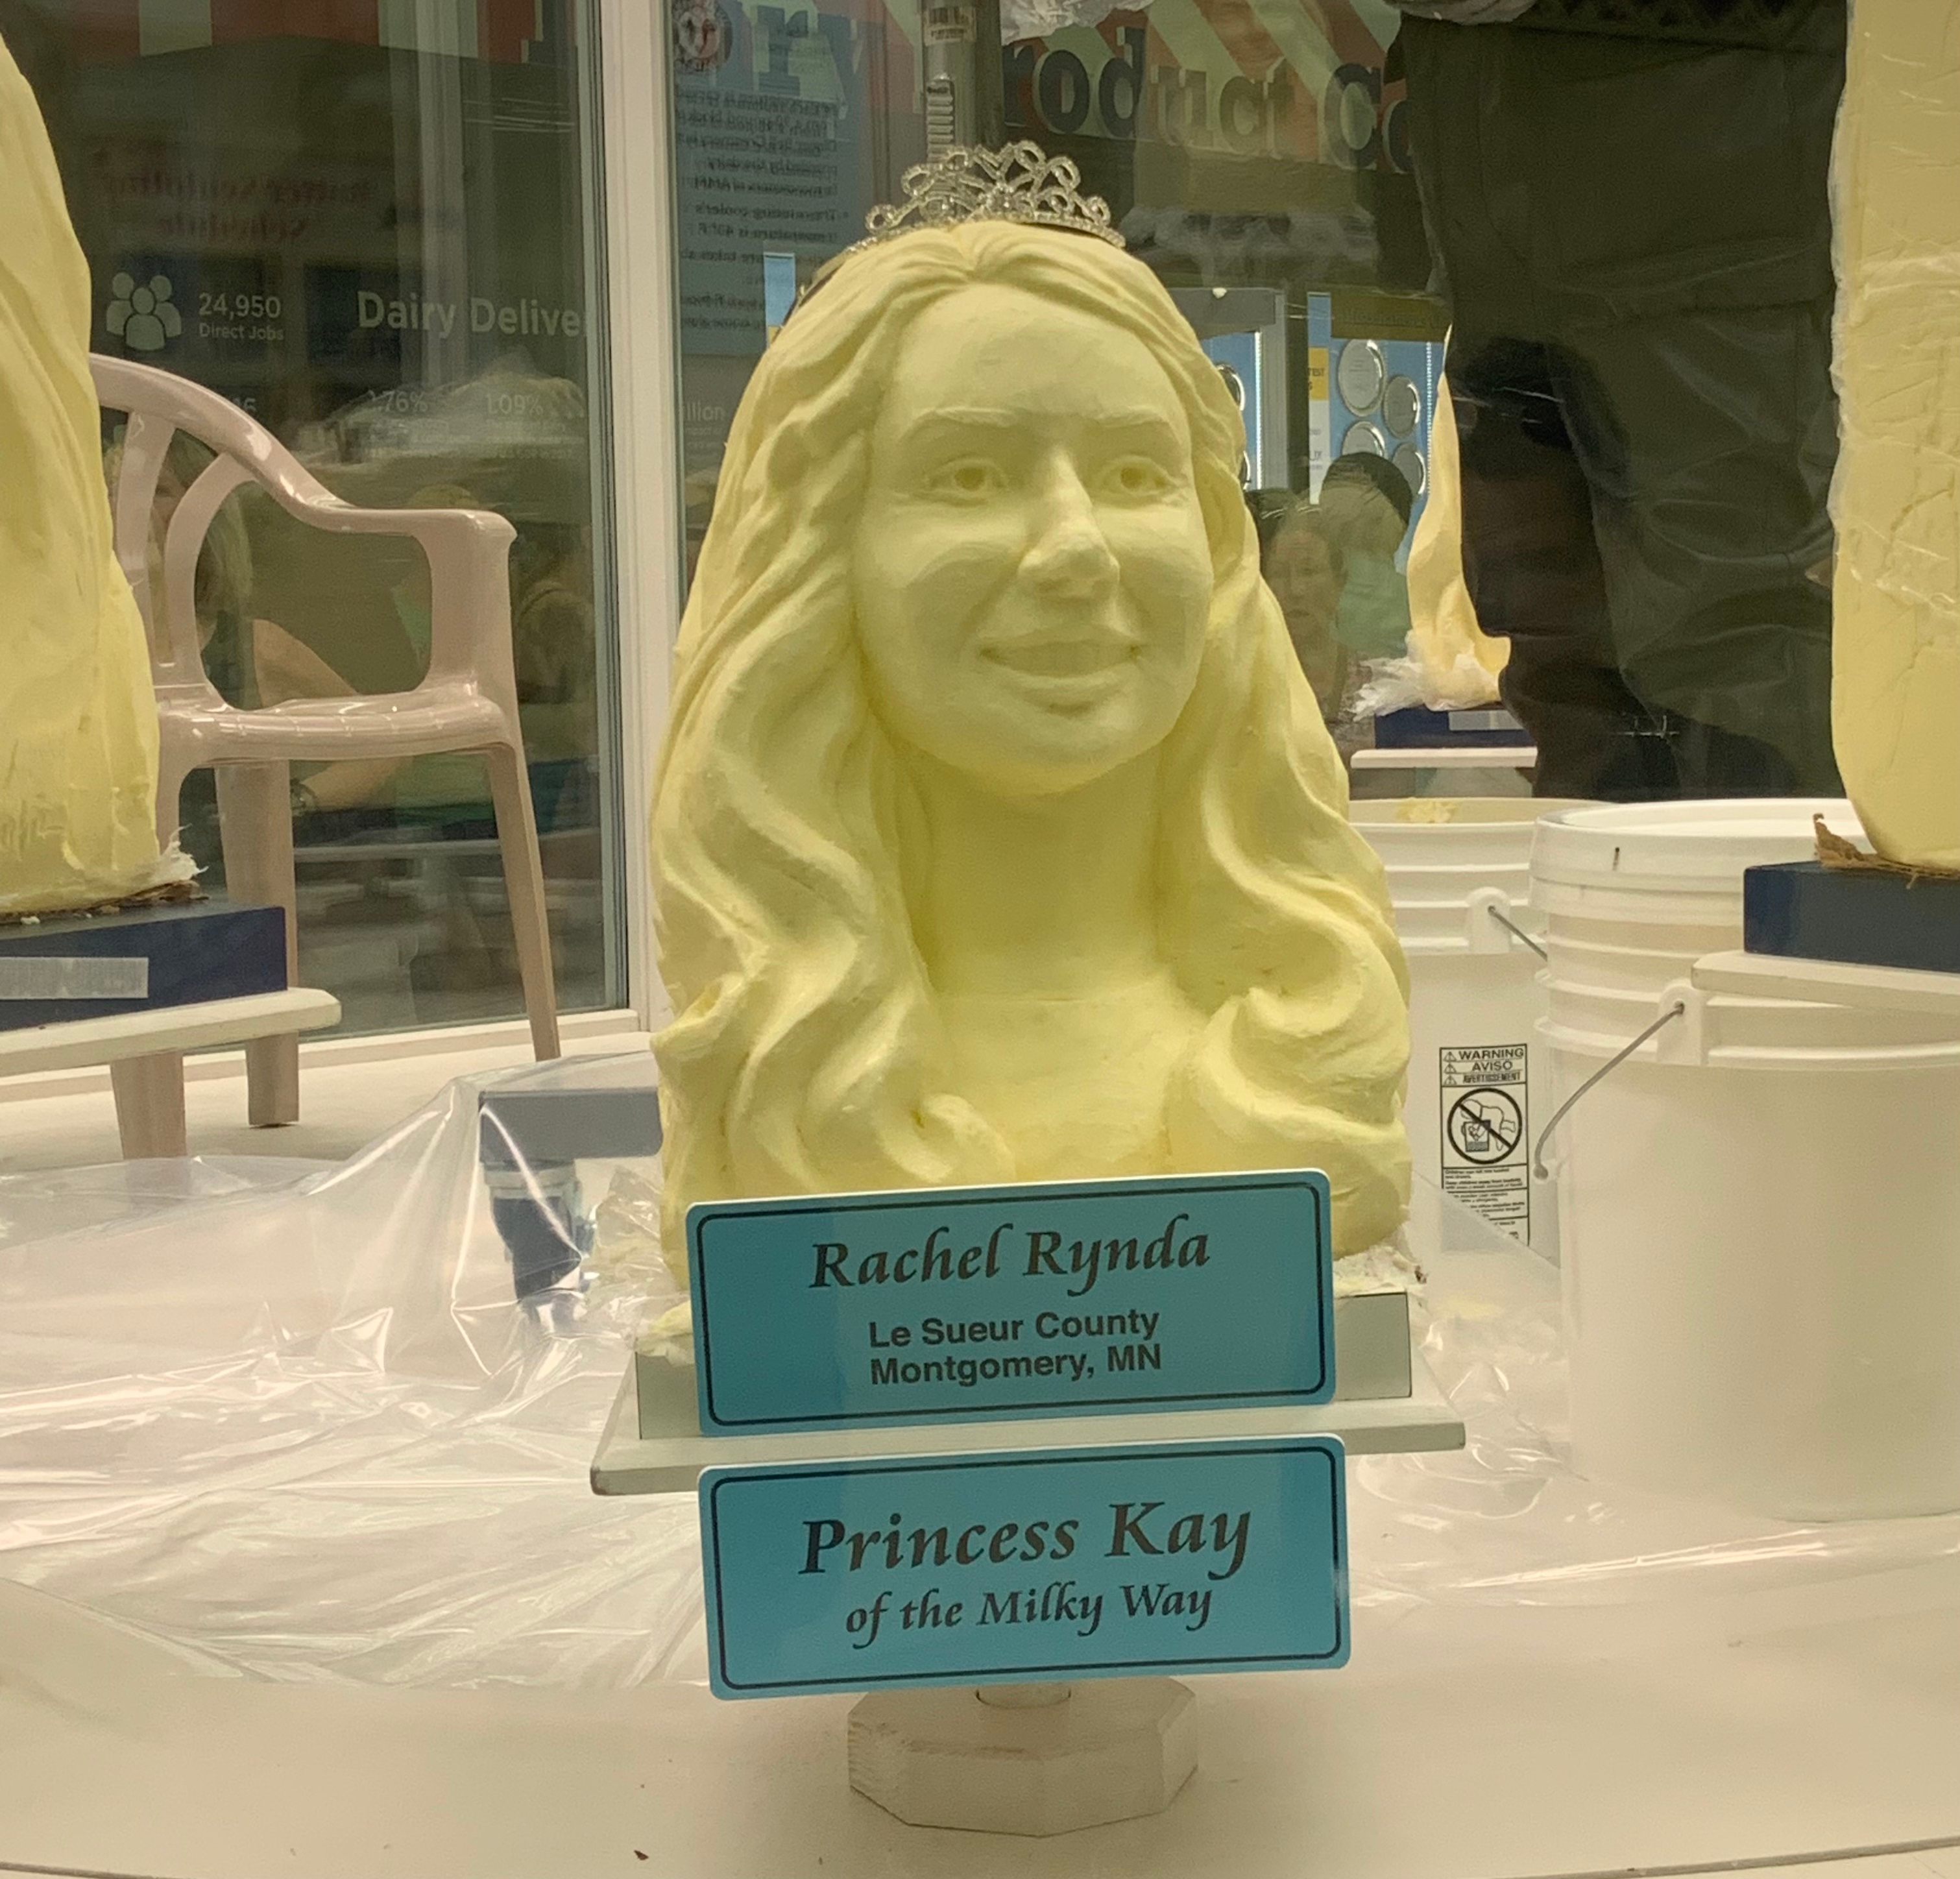 The finished sculpture of Rachel Rynda.